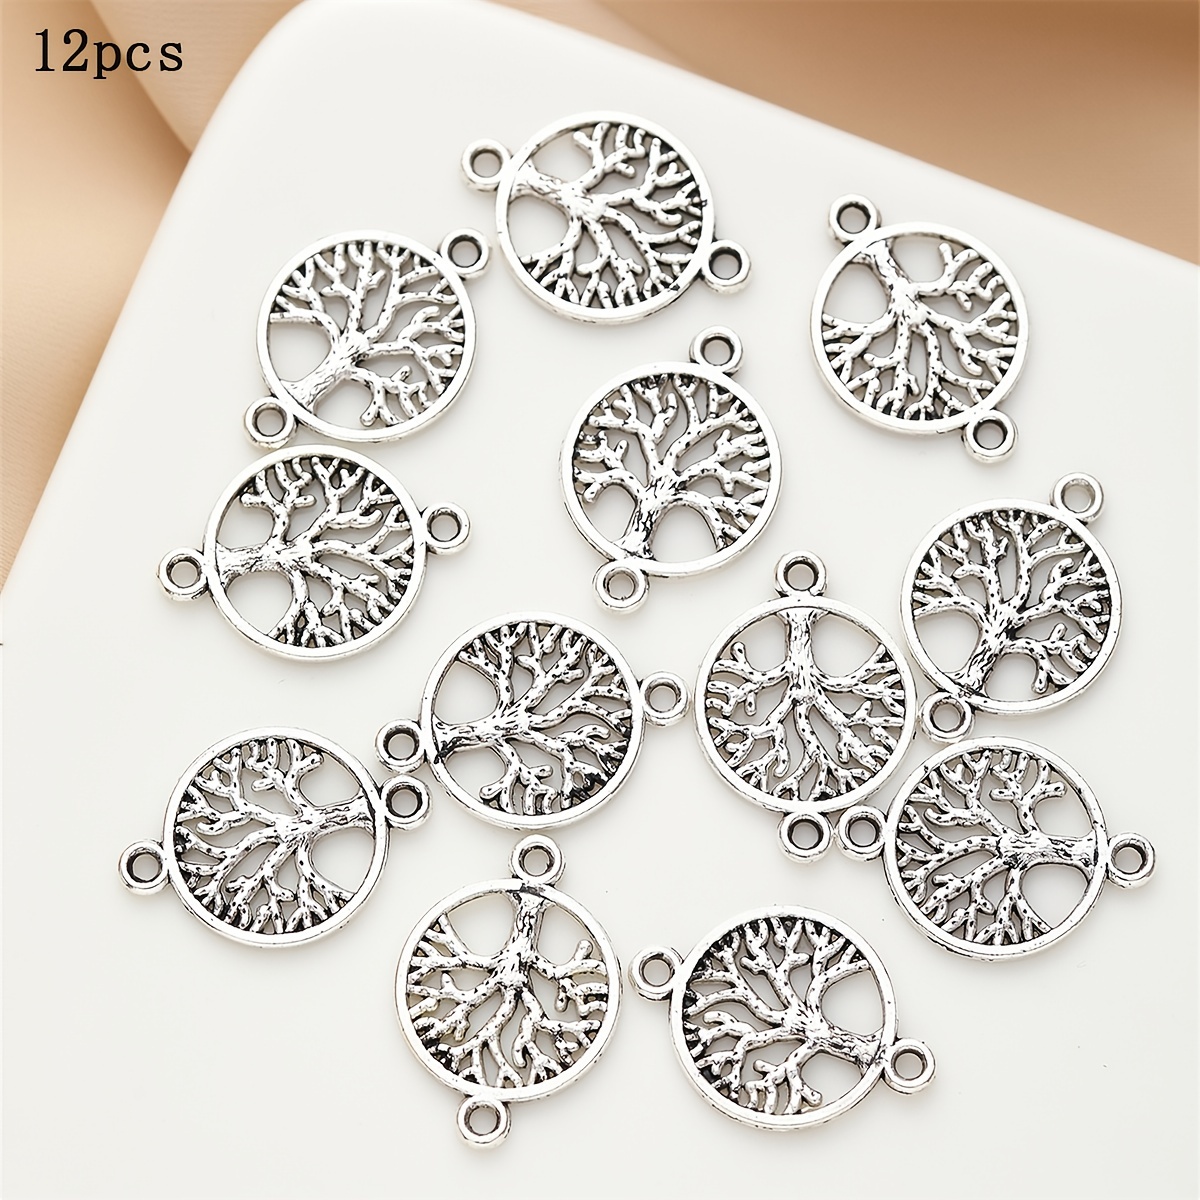 10/20/30/50pcs Metal Alloy Silver Charm Pendant Beads For DIY Handmade  Bracelets, Neacklaces, Earrings, DIY Jewelry Accessories, Assorted Varieties